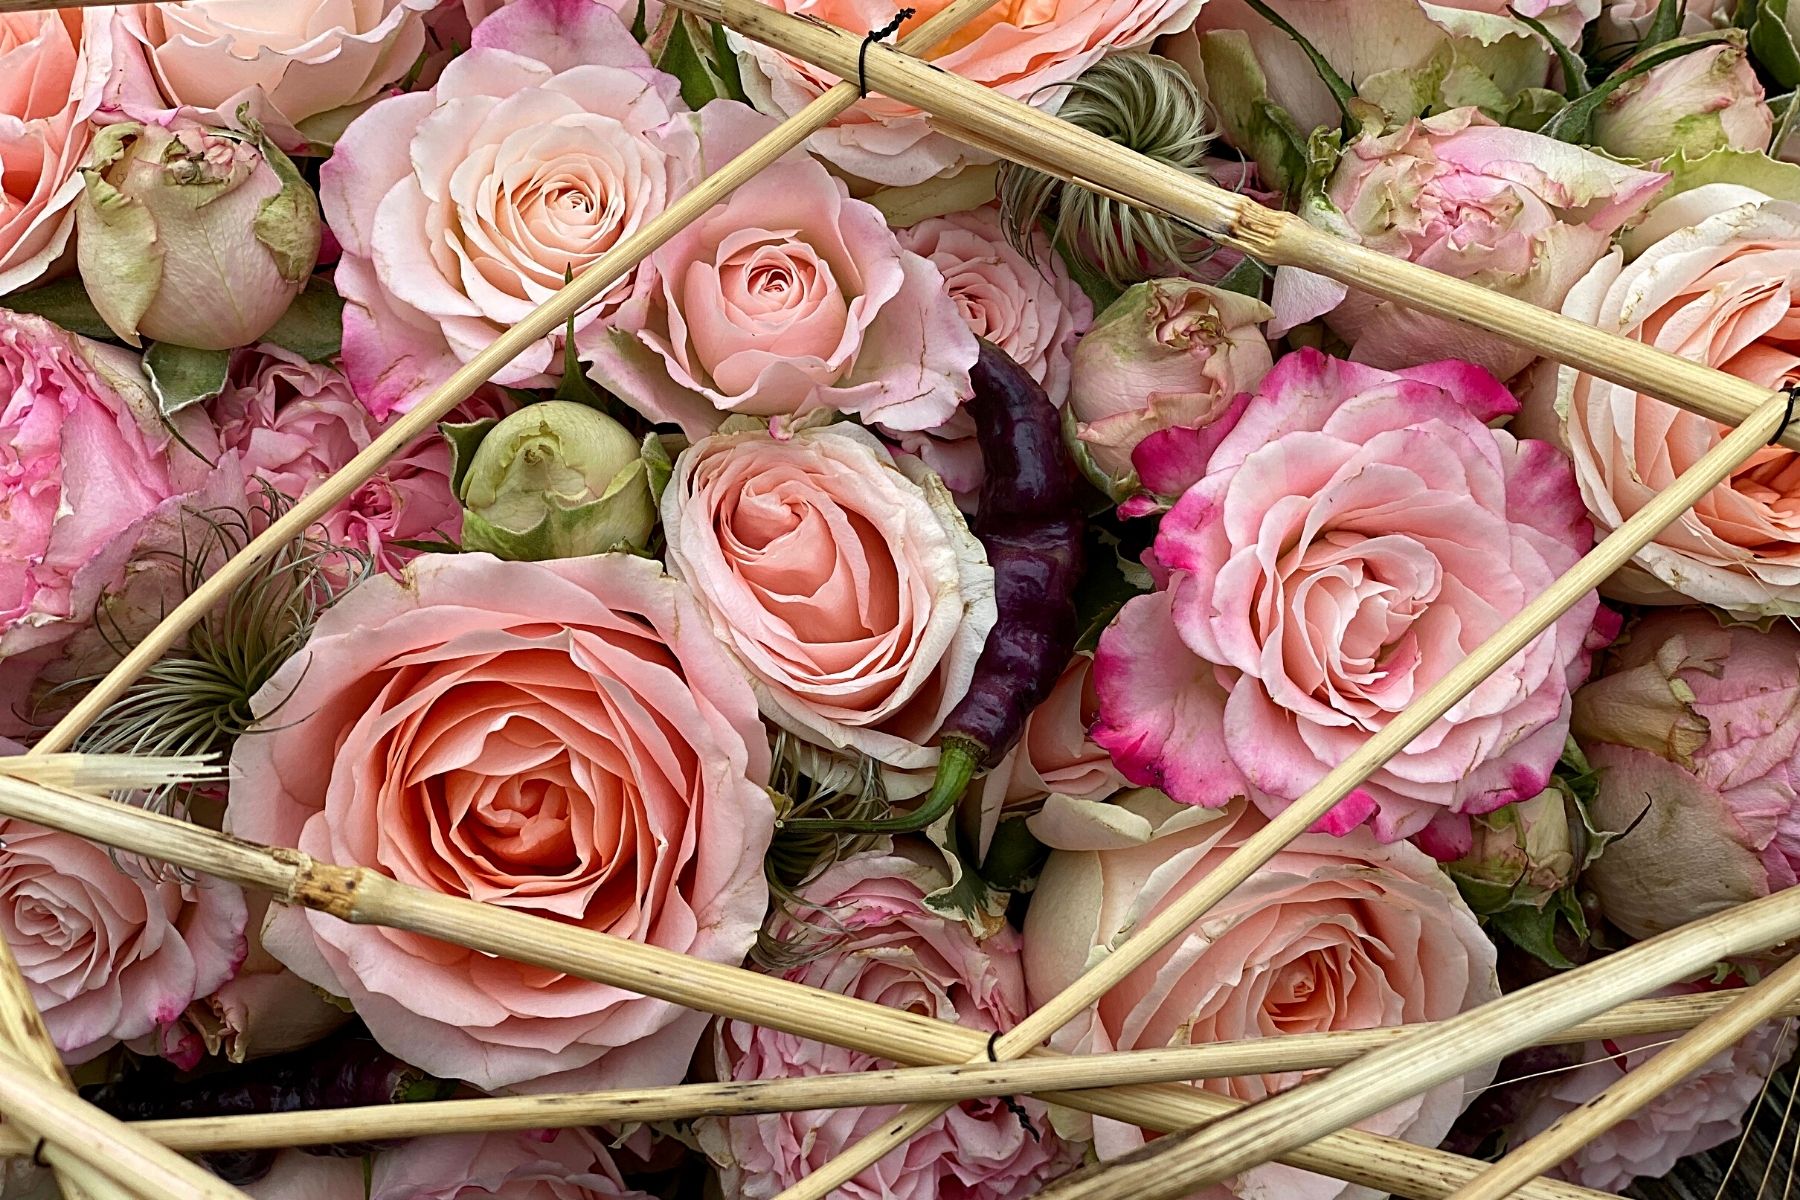 For the Love of a Rose, the Florist Is the Servant of a Thousand Thorns - Article on Thursd (9)